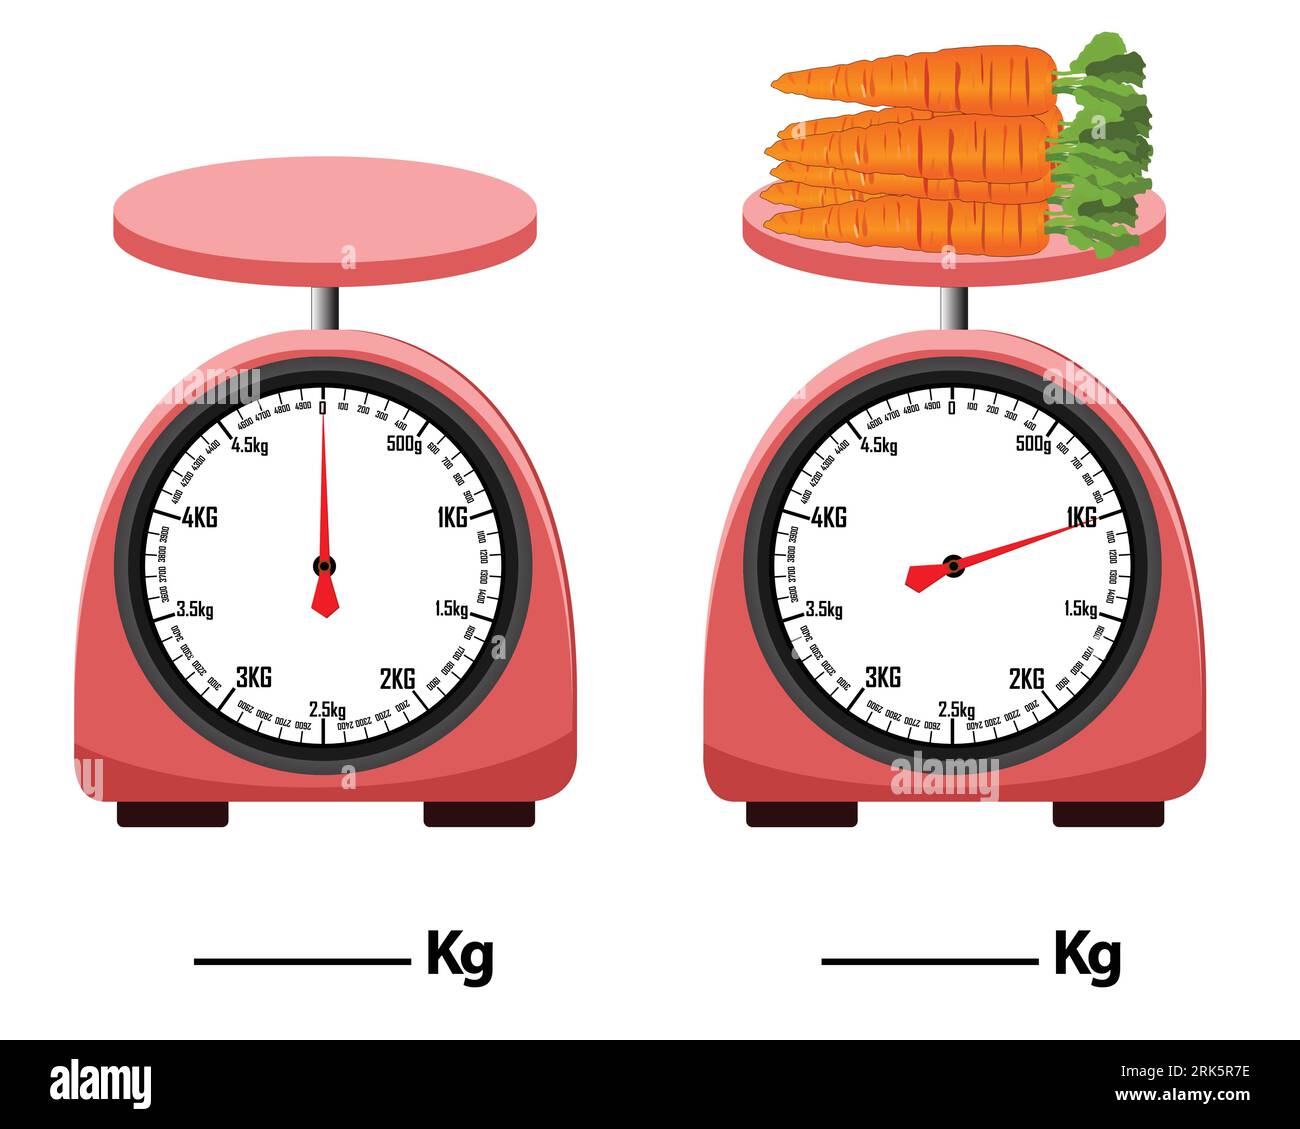 https://c8.alamy.com/comp/2RK5R7E/analog-scale-carrot-weight-scale-isolated-on-white-background-simple-kitchen-scale-vector-illustration-measuring-analog-scale-clip-art-2RK5R7E.jpg